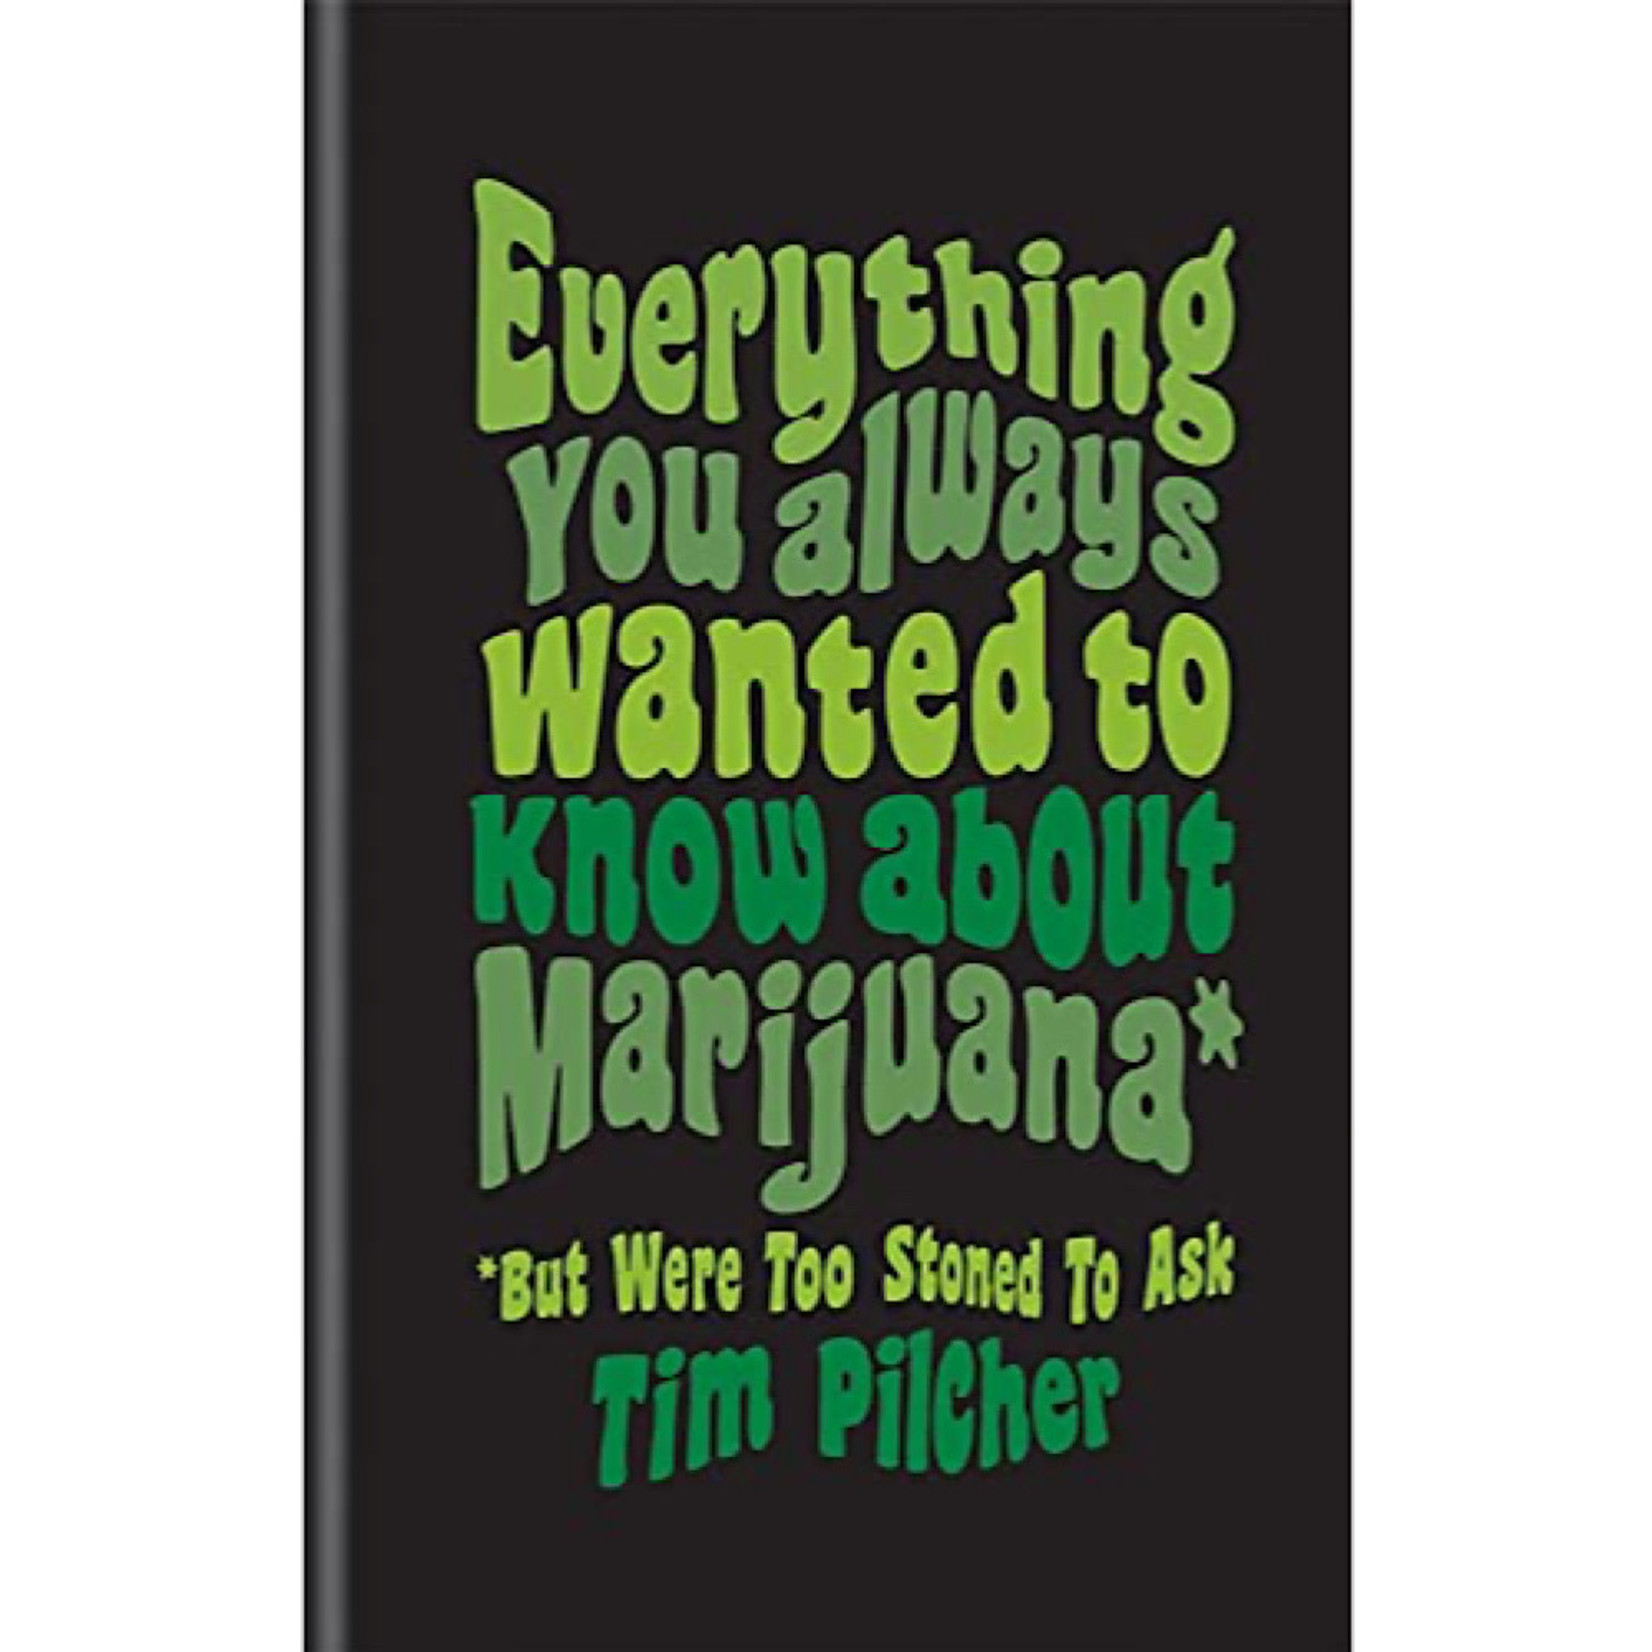 Book - Everything You Wanted To Know About Marijuana But Were Too Stoned To Ask